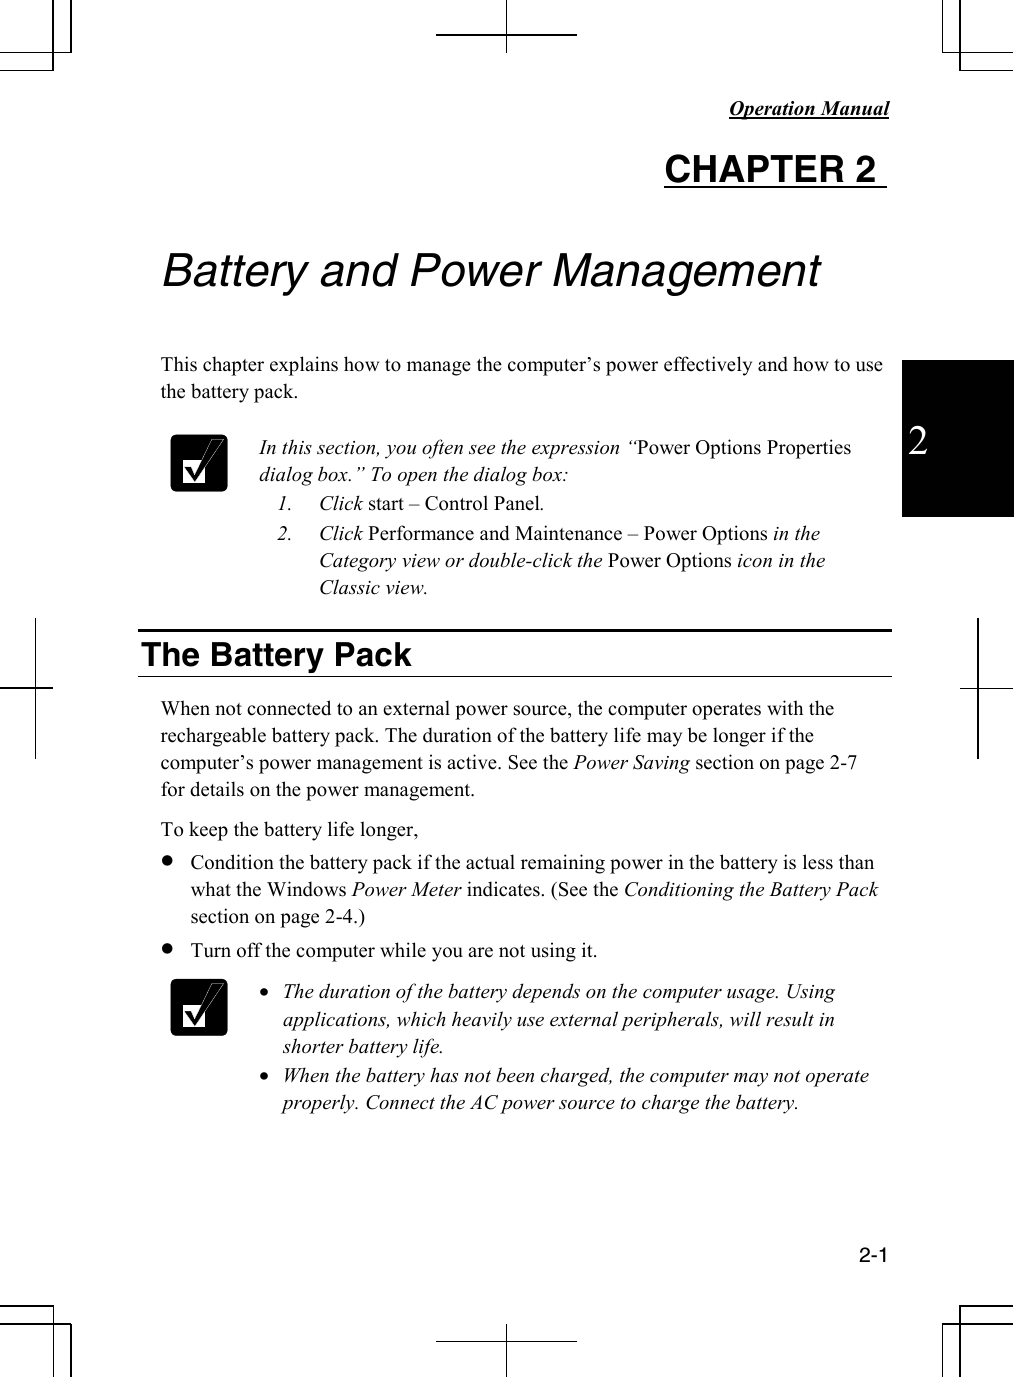   Operation Manual          2-1  2 CHAPTER 2    Battery and Power Management  This chapter explains how to manage the computer’s power effectively and how to use the battery pack.   In this section, you often see the expression “Power Options Properties dialog box.” To open the dialog box: 1. Click start – Control Panel. 2. Click Performance and Maintenance – Power Options in the Category view or double-click the Power Options icon in the Classic view.  The Battery Pack  When not connected to an external power source, the computer operates with the rechargeable battery pack. The duration of the battery life may be longer if the computer’s power management is active. See the Power Saving section on page 2-7 for details on the power management.  To keep the battery life longer, • Condition the battery pack if the actual remaining power in the battery is less than what the Windows Power Meter indicates. (See the Conditioning the Battery Pack section on page 2-4.) • Turn off the computer while you are not using it.  • The duration of the battery depends on the computer usage. Using applications, which heavily use external peripherals, will result in shorter battery life. • When the battery has not been charged, the computer may not operate properly. Connect the AC power source to charge the battery.     